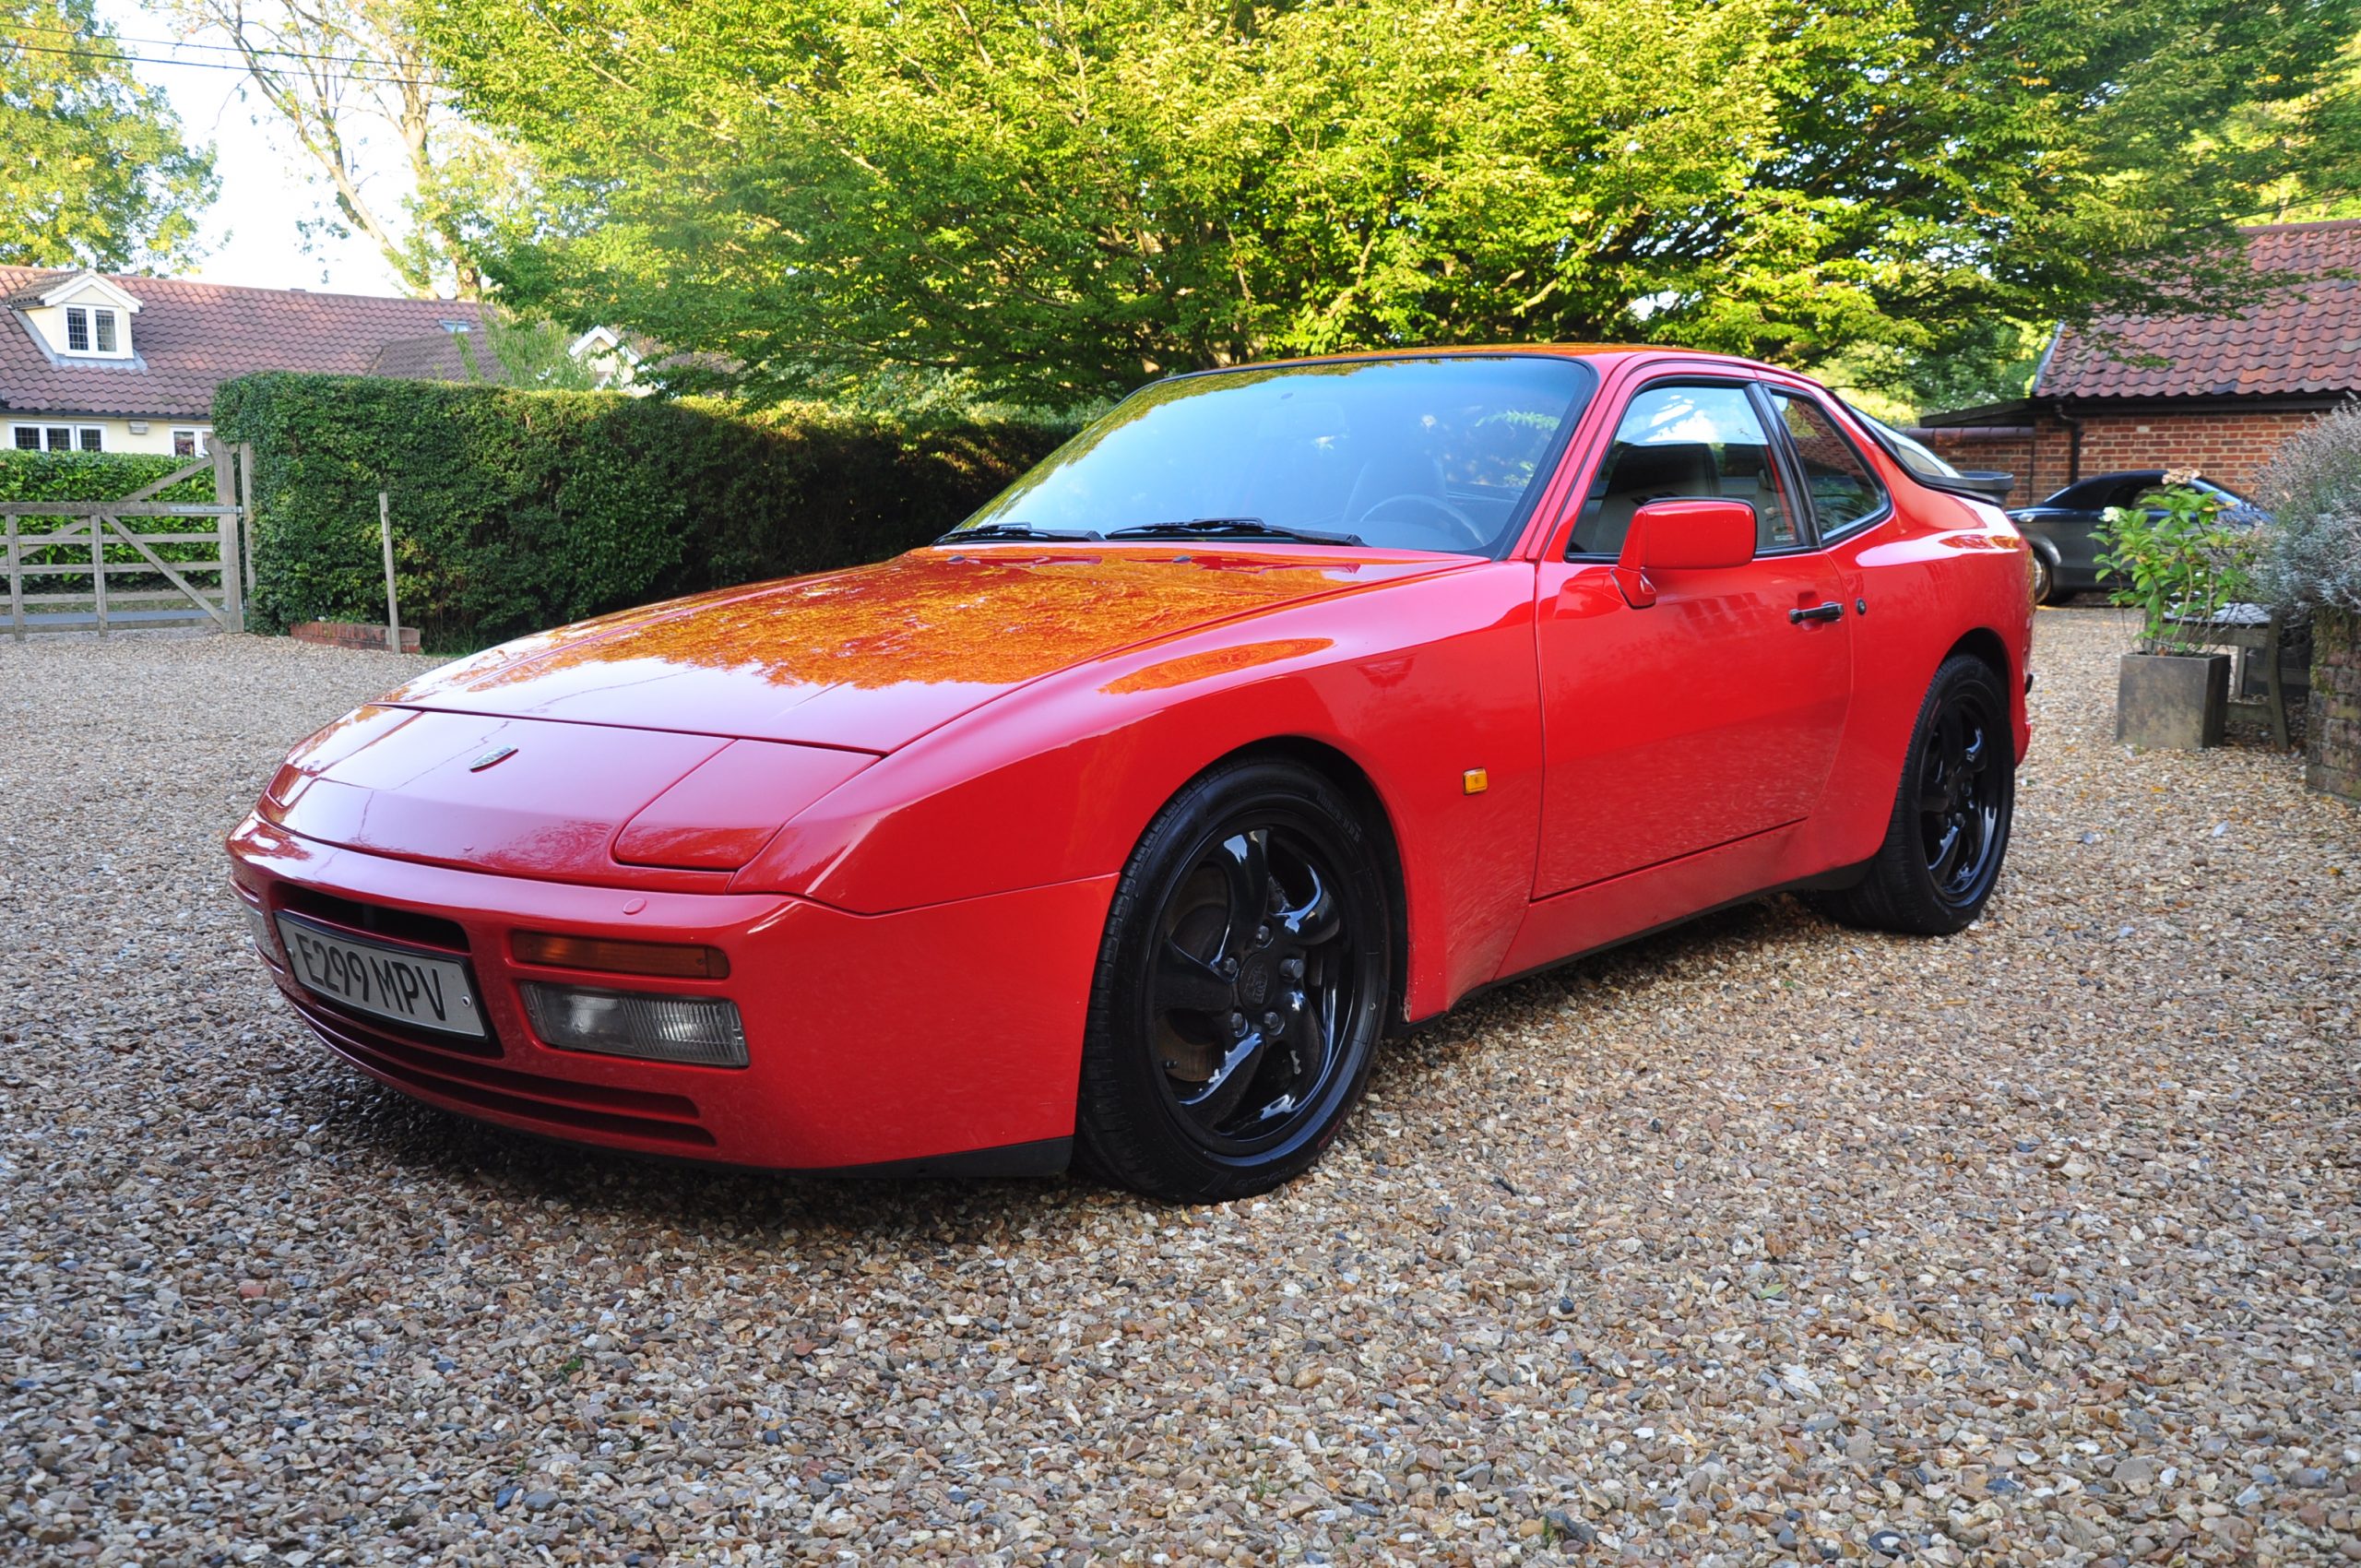 1988 Porsche 944 Turbo (LHD) – NOW SOLD full